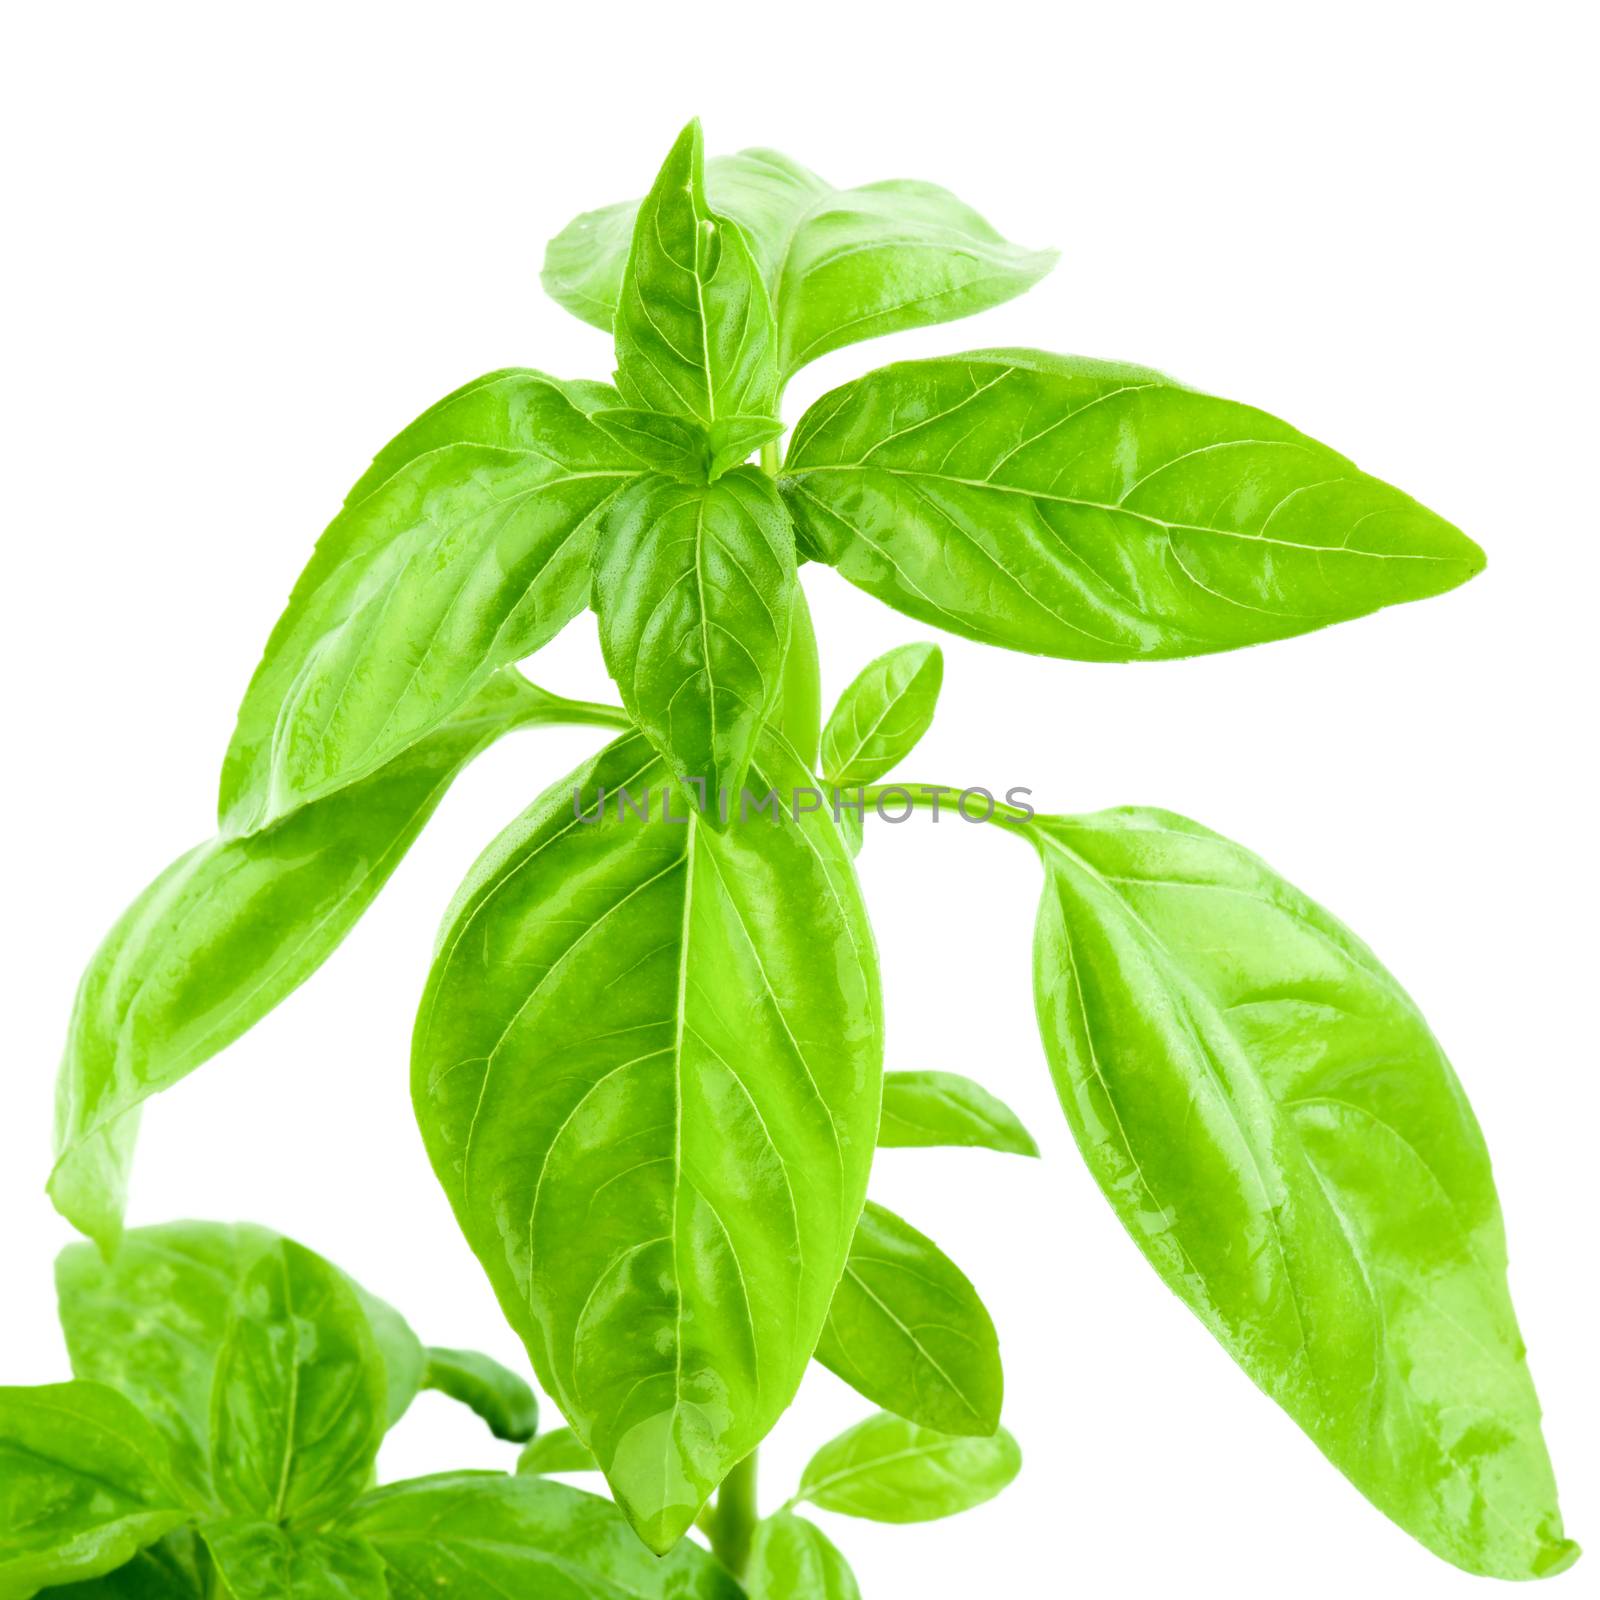 Sprout of Green Basil by zhekos